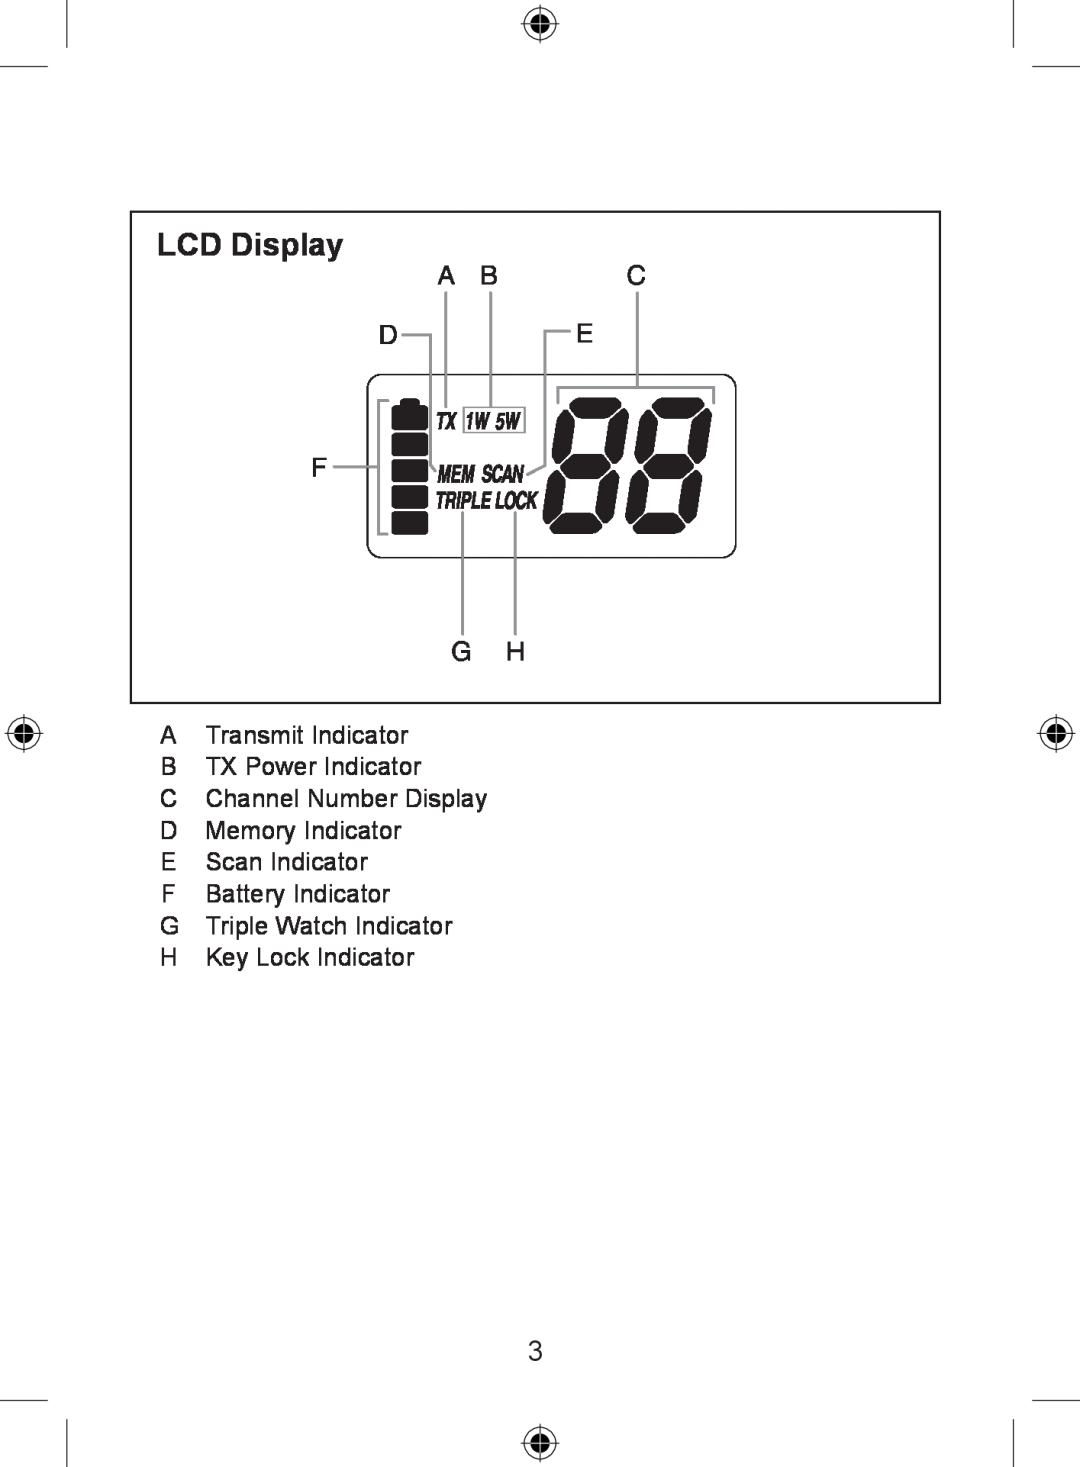 Uniden 250 LCD Display, A Bc De F G H, ATransmit Indicator BTX Power Indicator, CChannel Number Display DMemory Indicator 